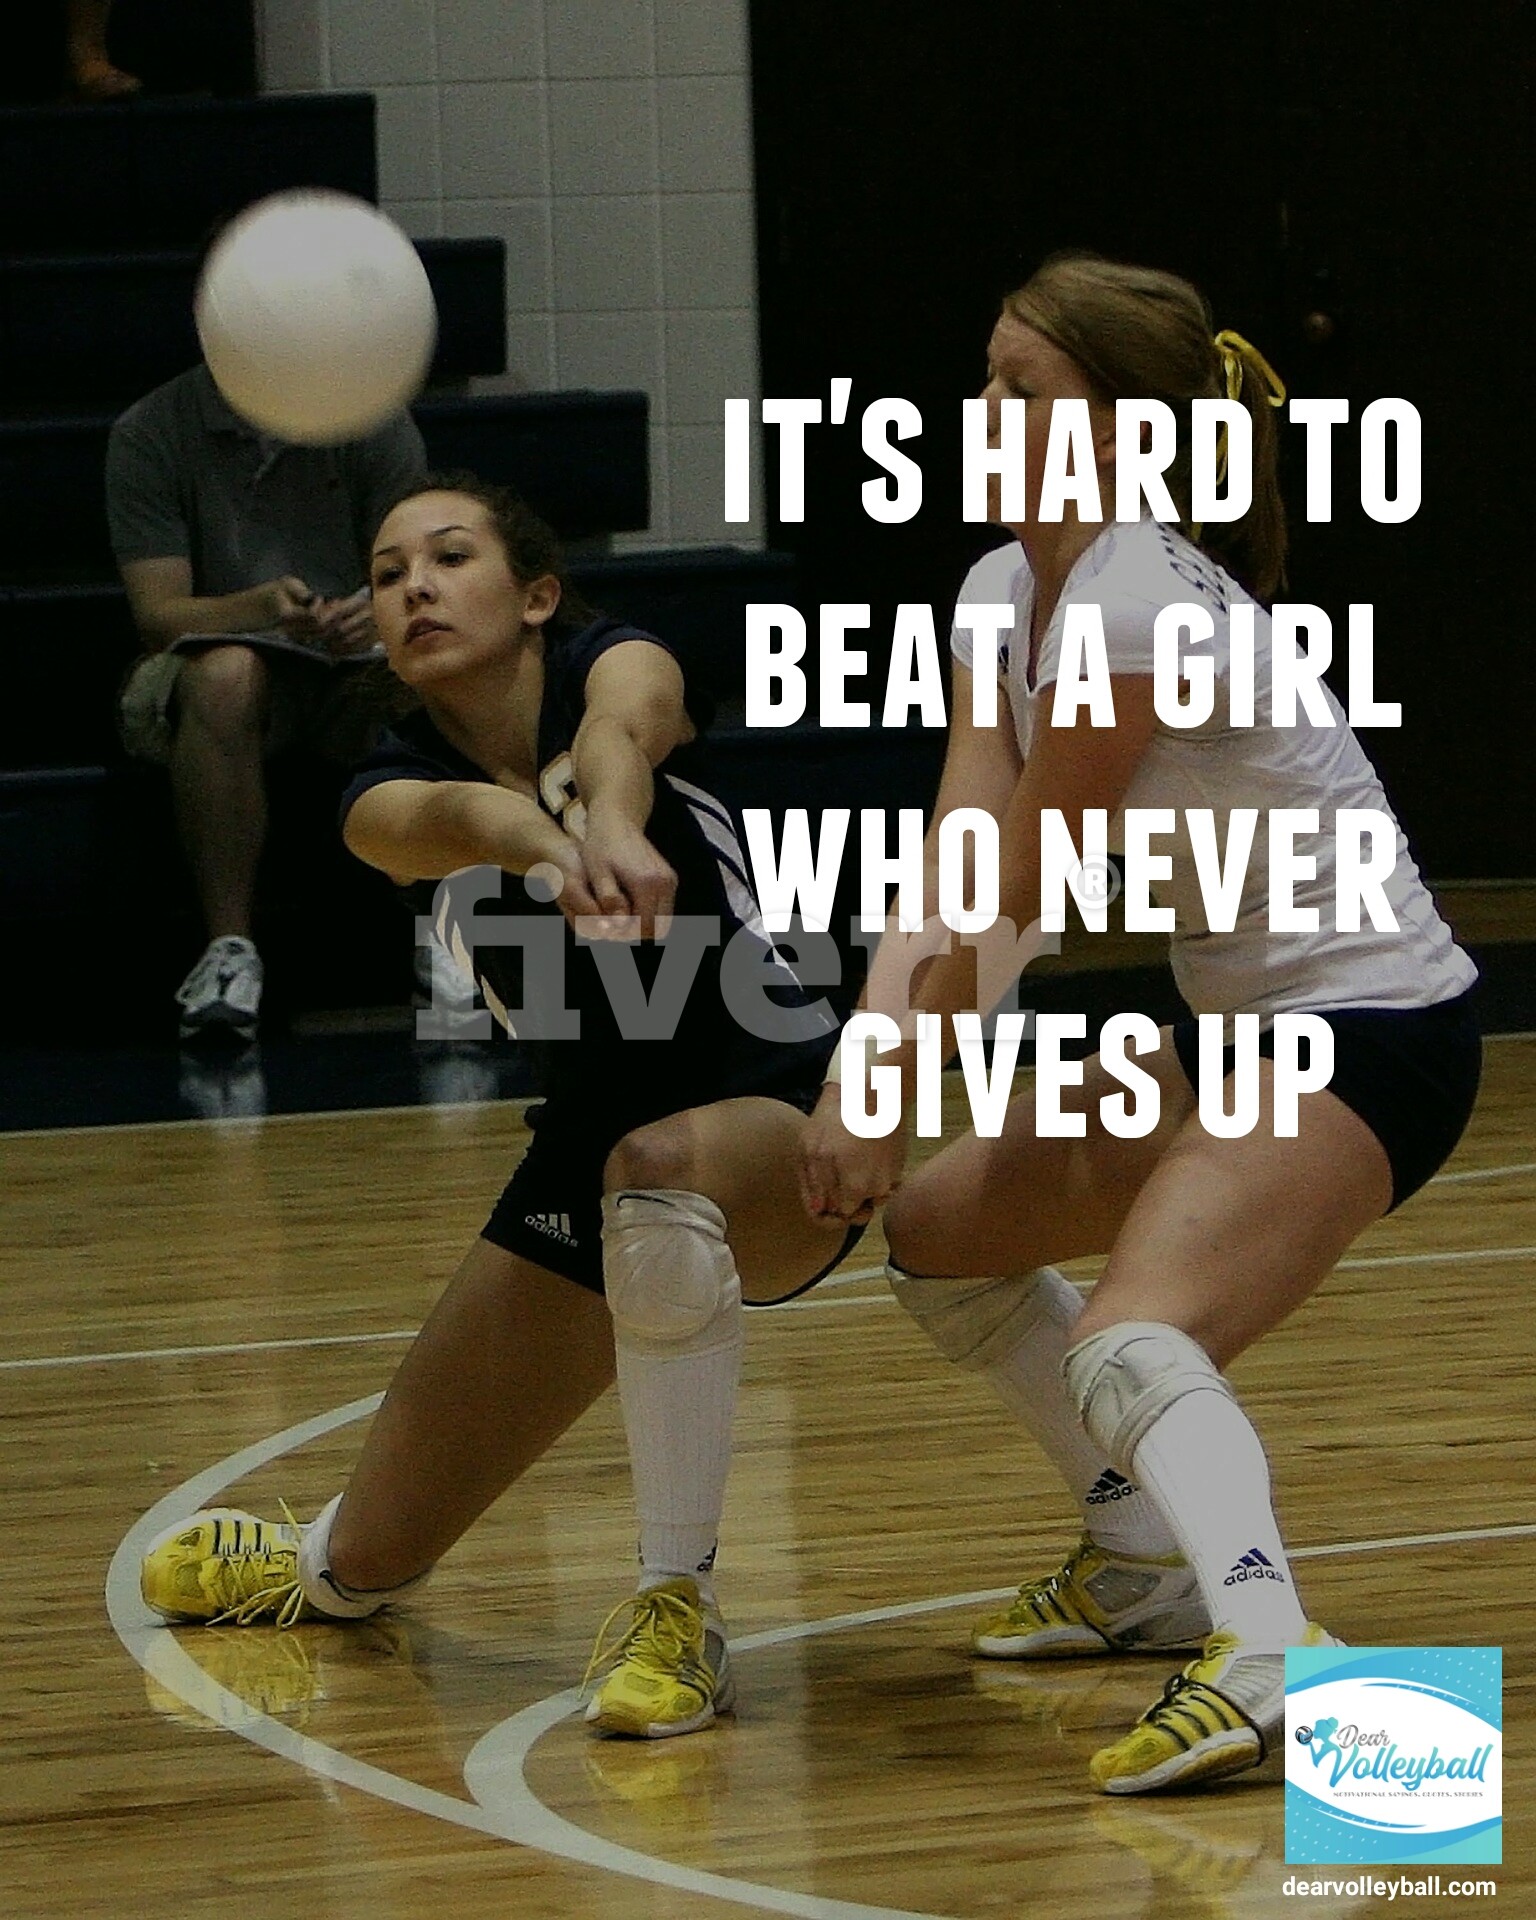 volleyball quote